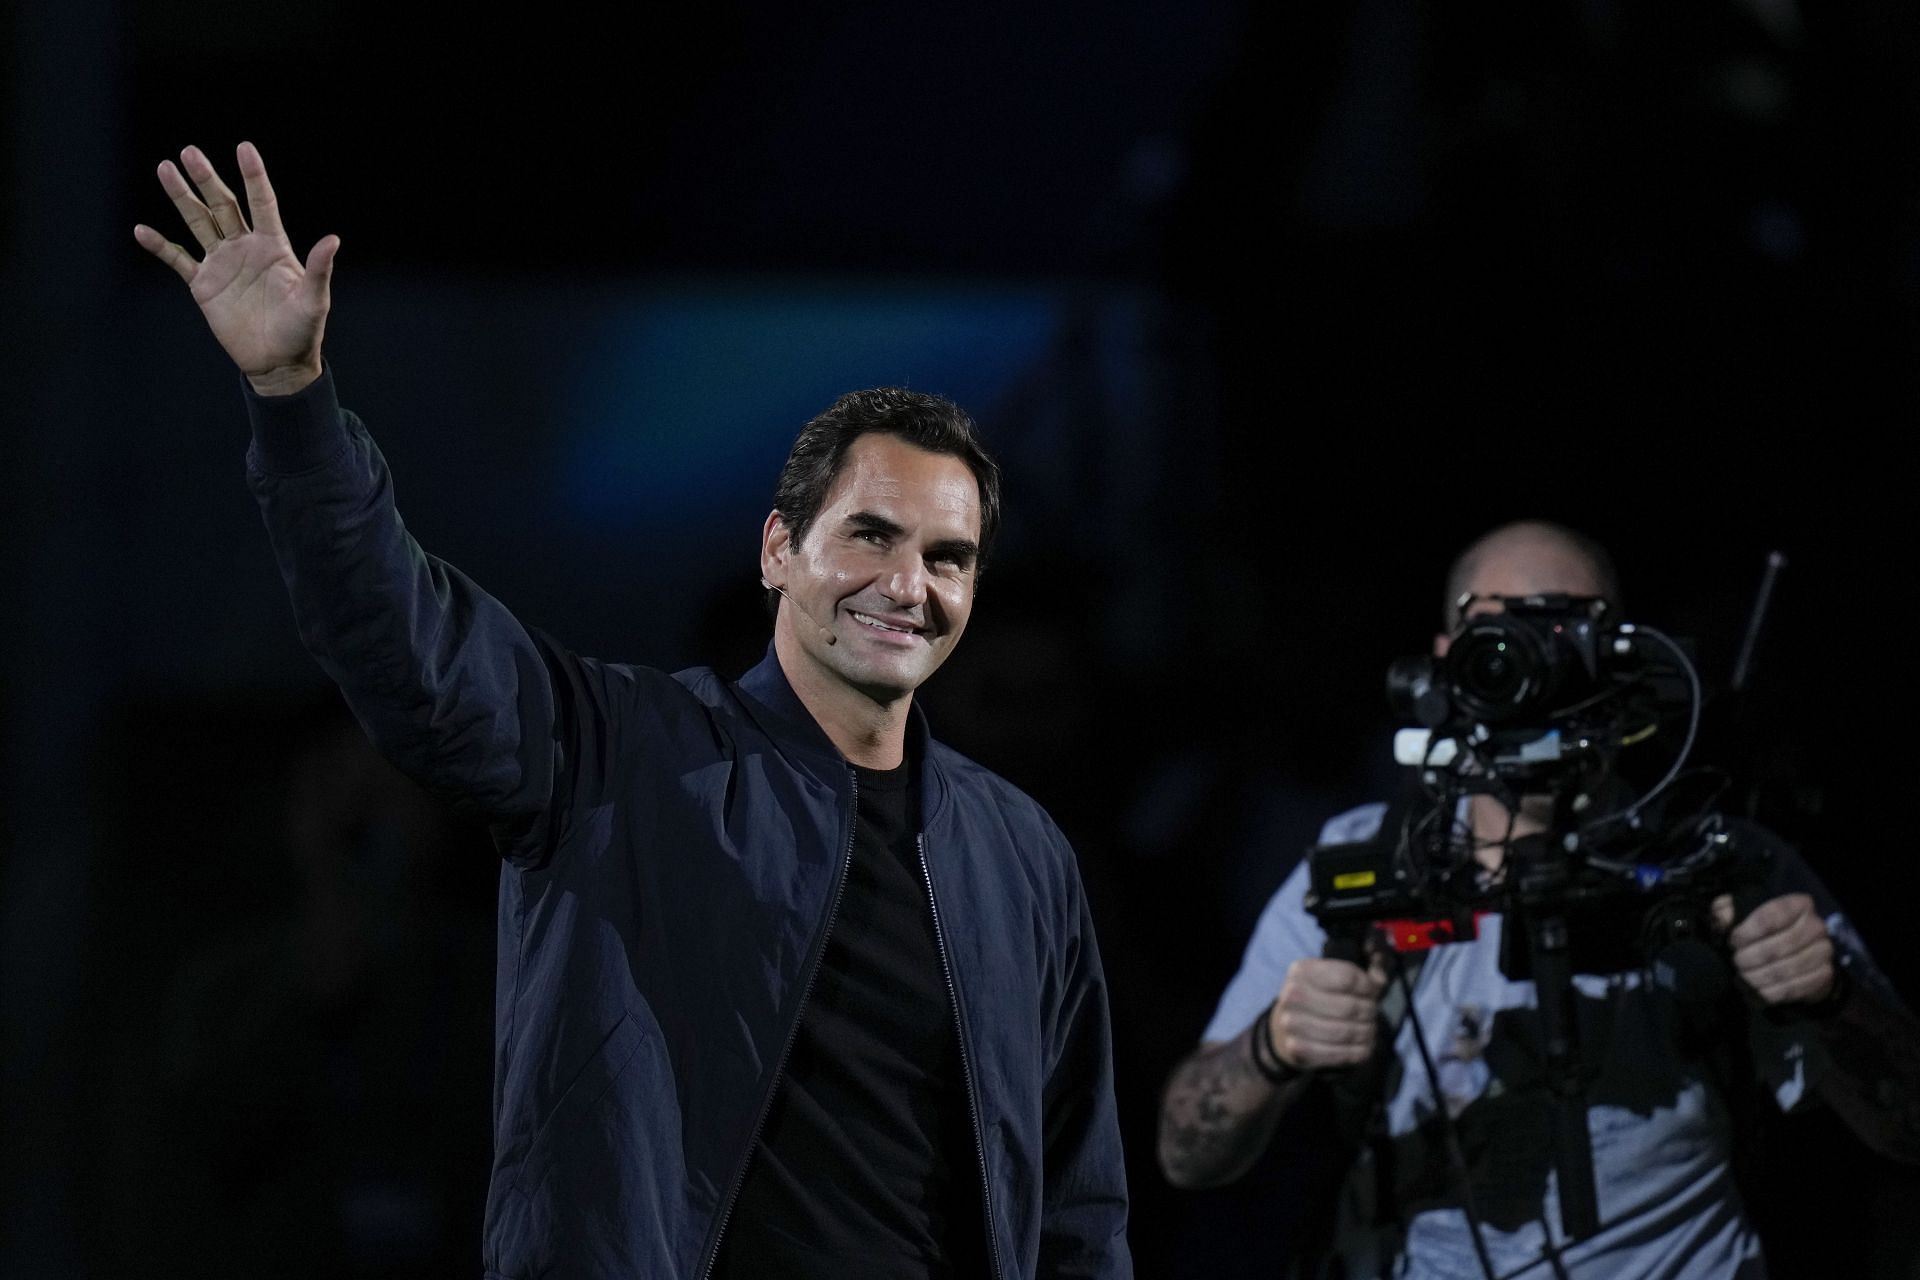 Roger Federer at the 2023 Shanghai Masters in China.